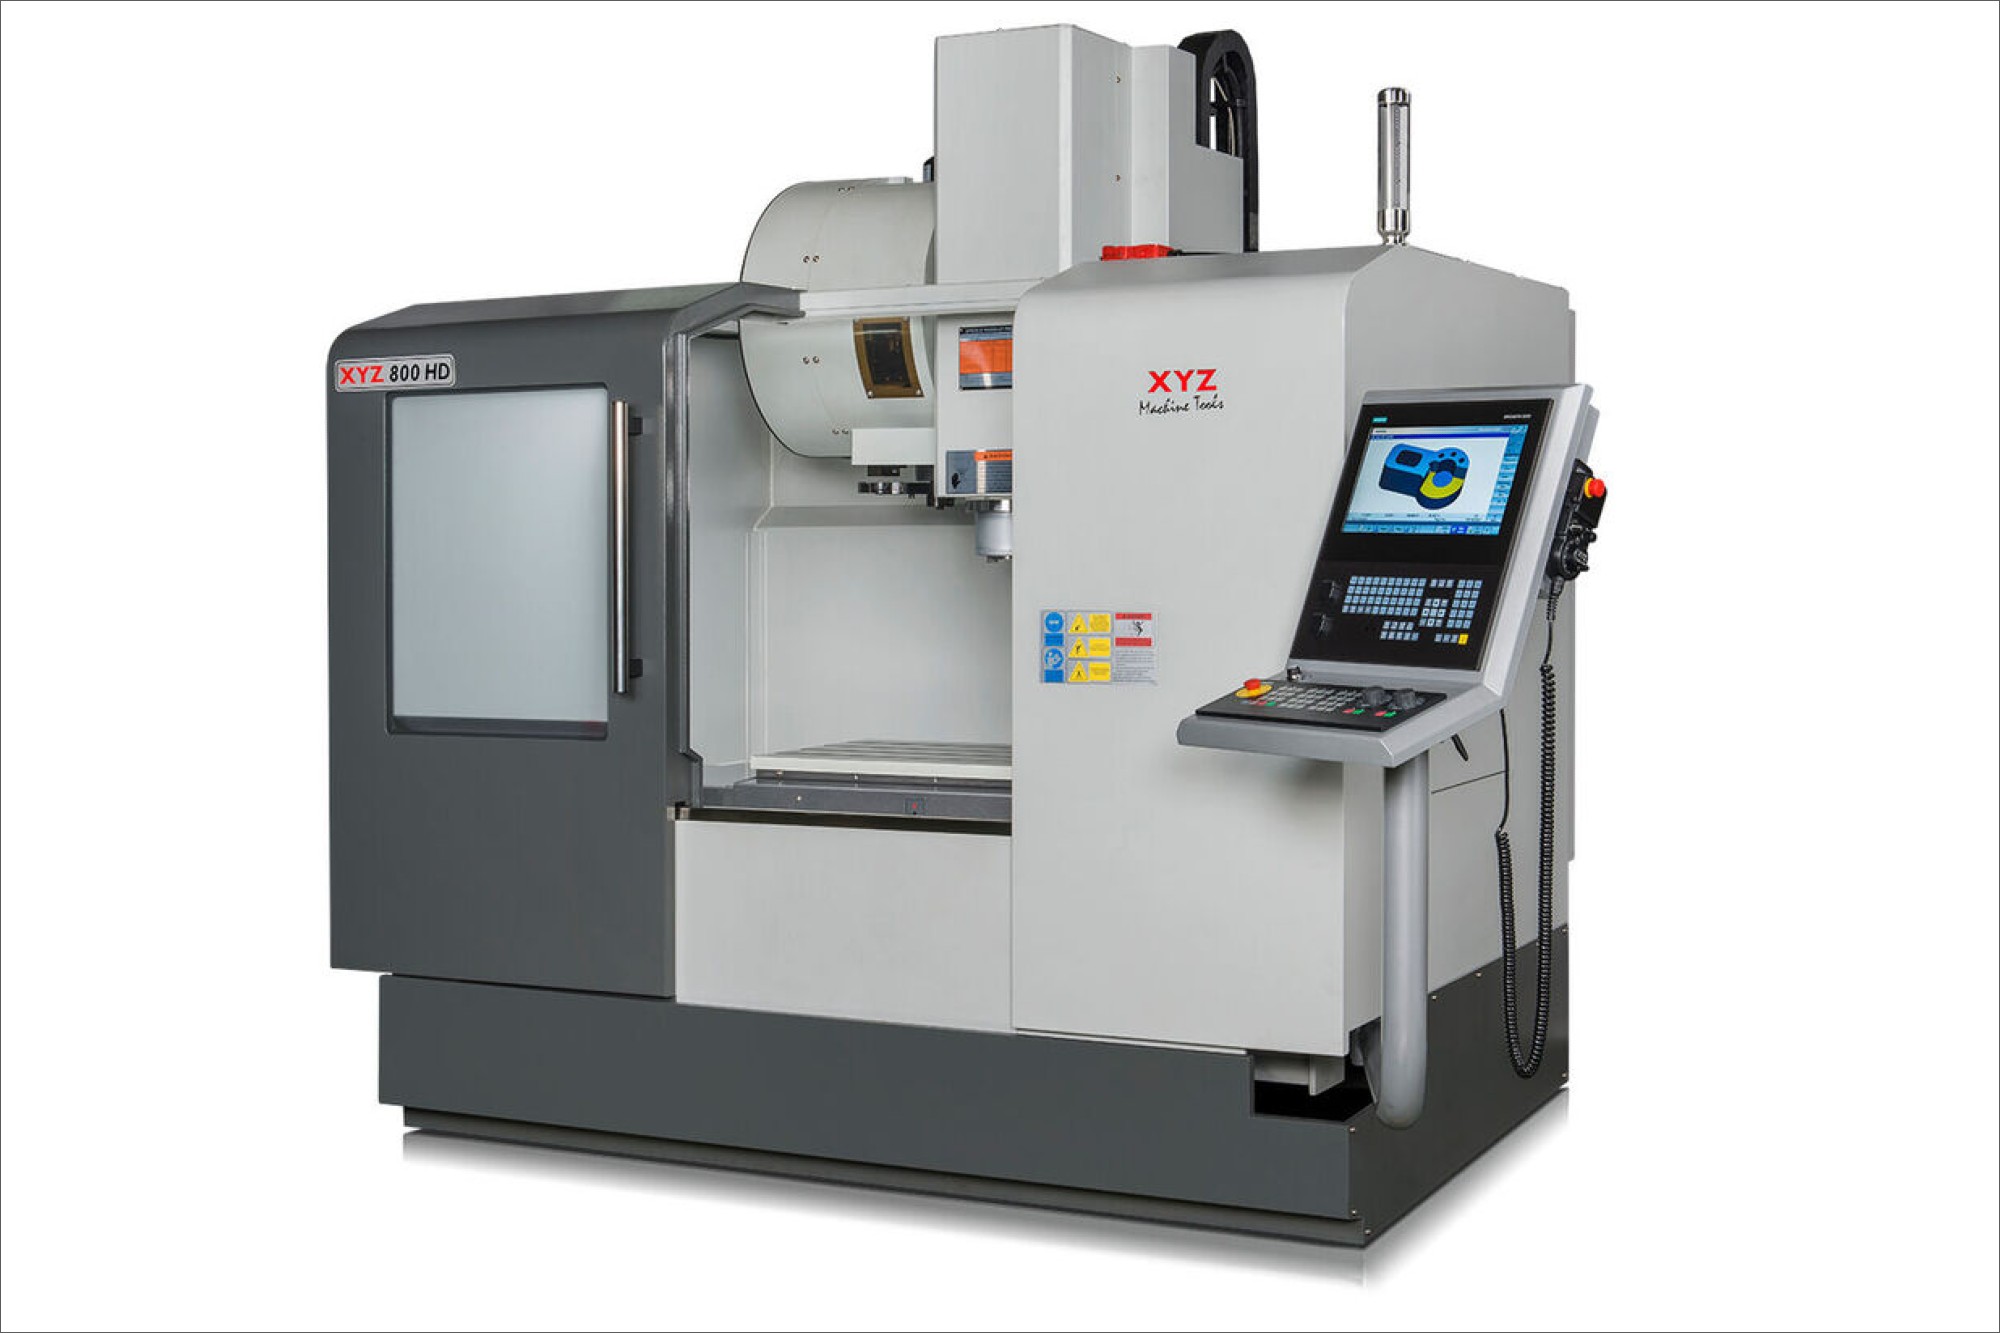 XYZ plans to display seven machines to Southern Manufacturing